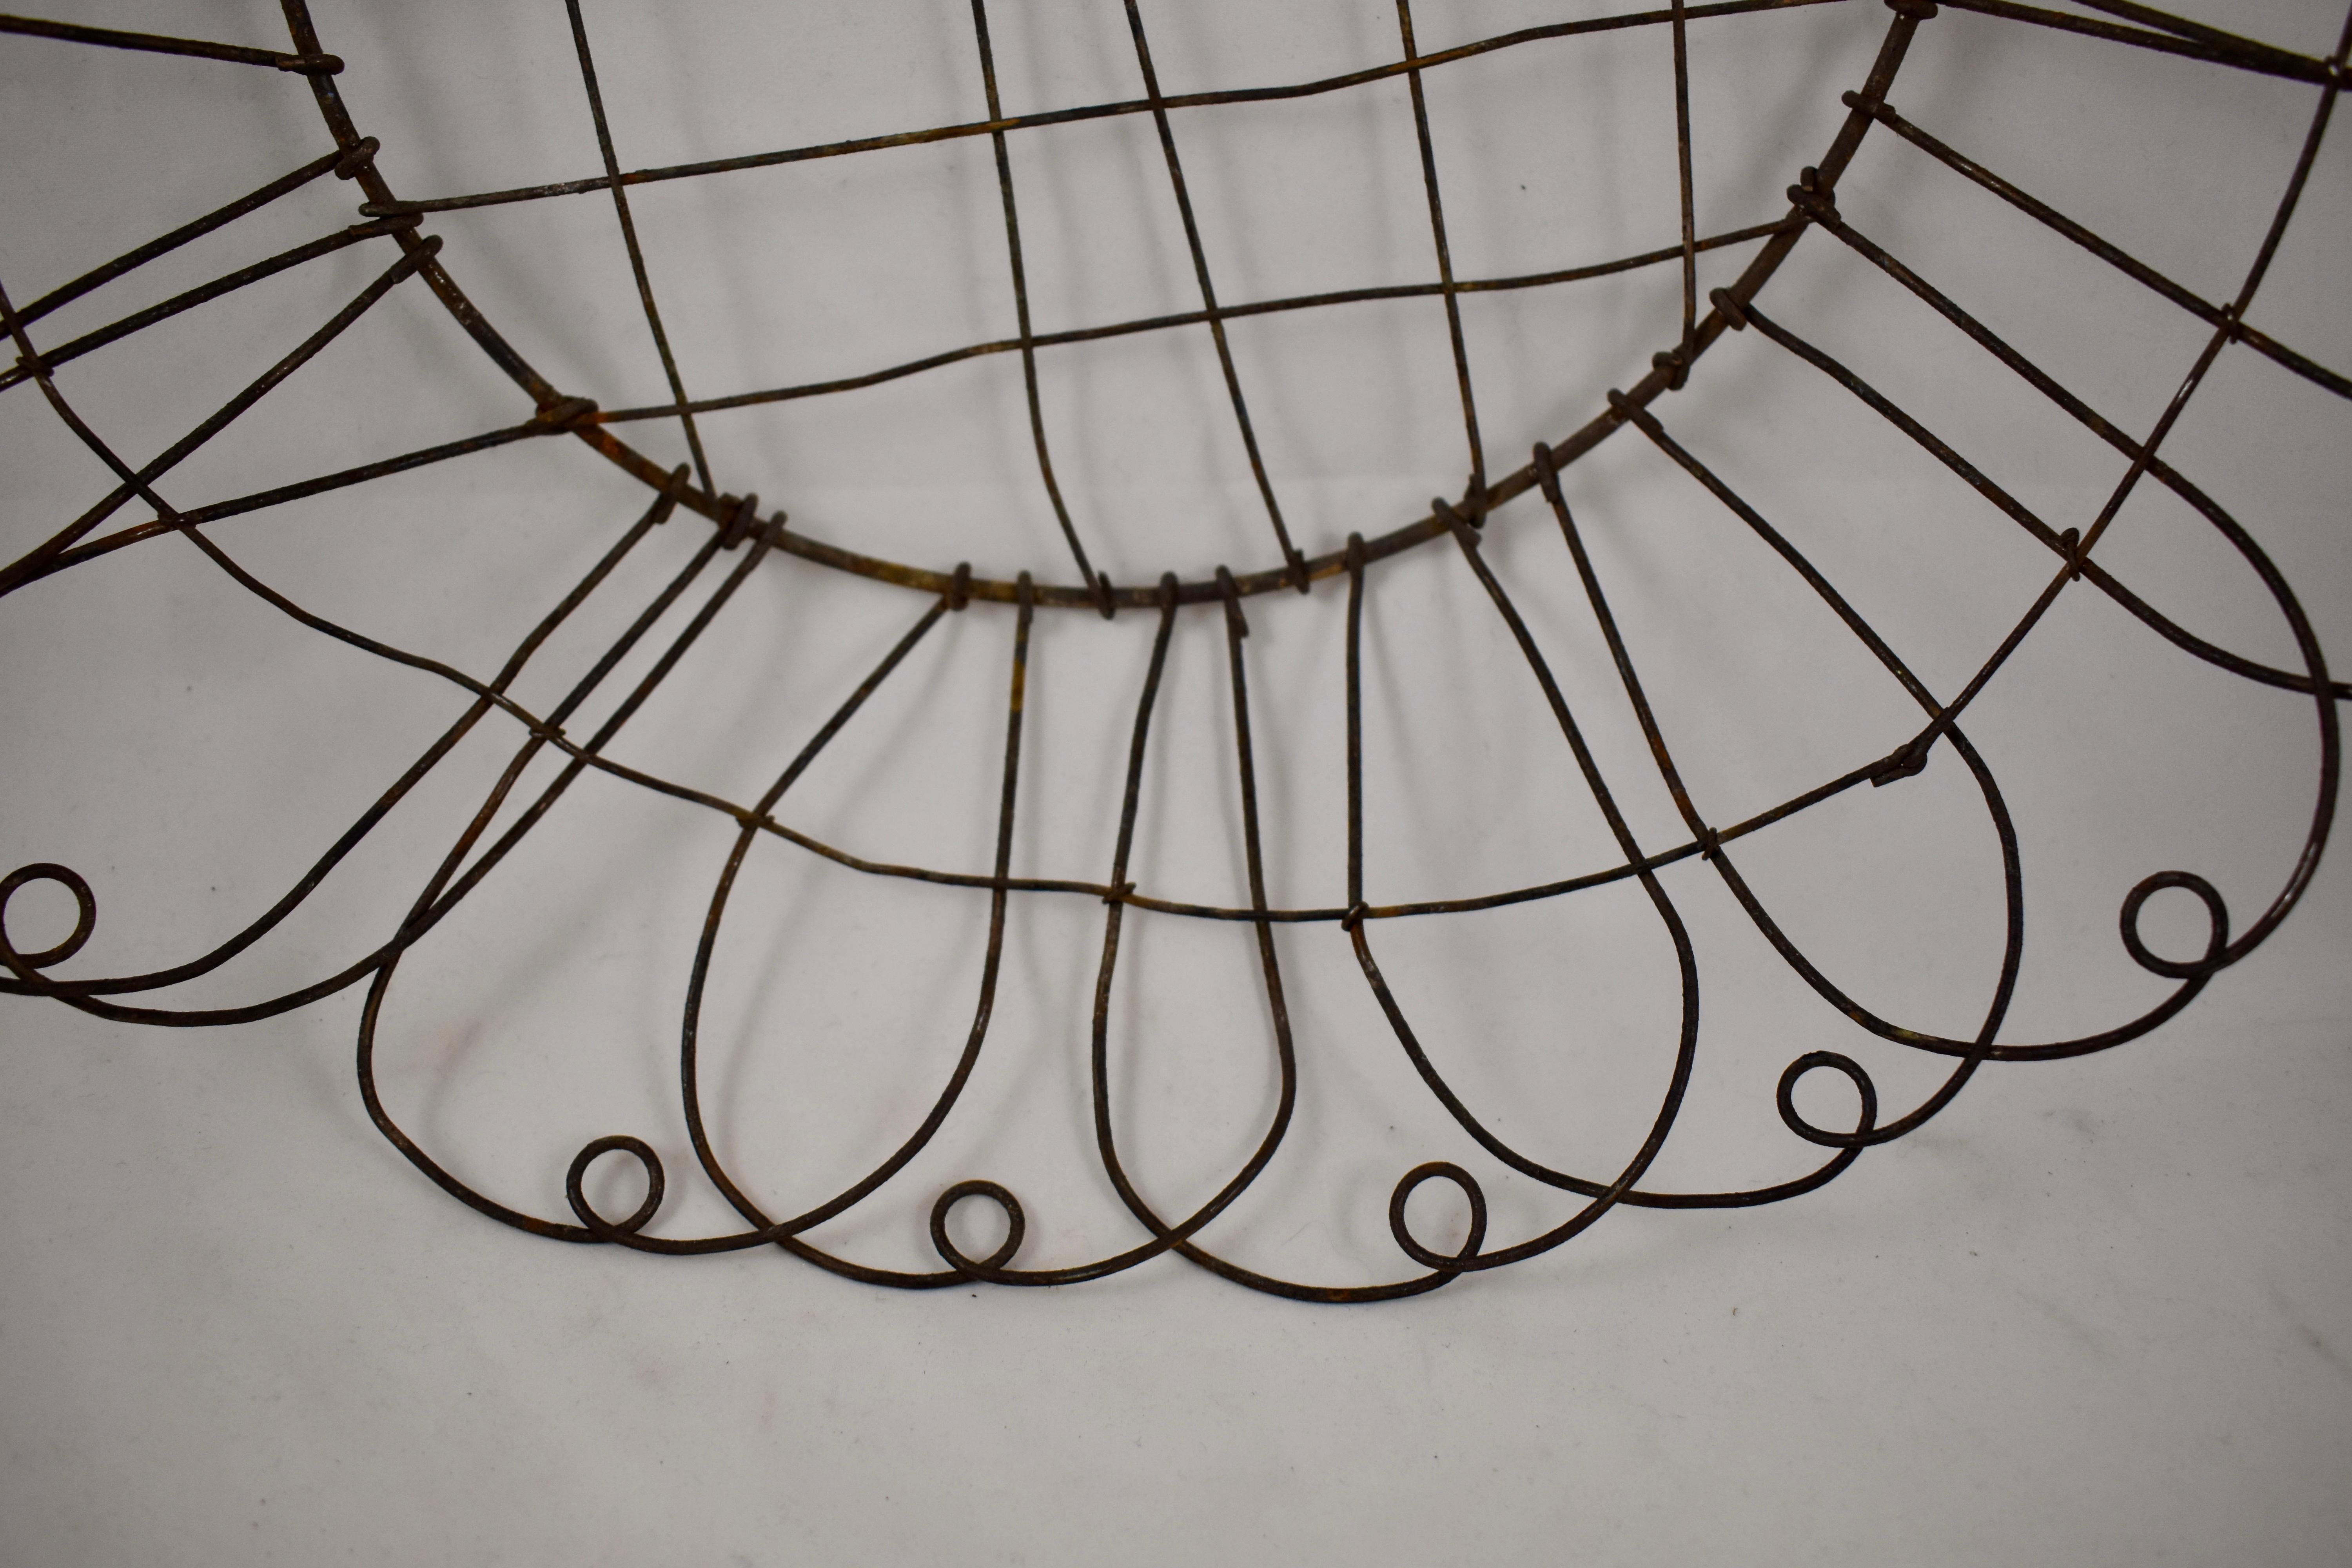 A charming, rustic, large round wire basket, late 19th Century, France. Hand-formed with open work woven metal, and a petal like rim. 

This type of basket looks beautiful hanging on a wall as a piece of antique French Folk Art. It works equally